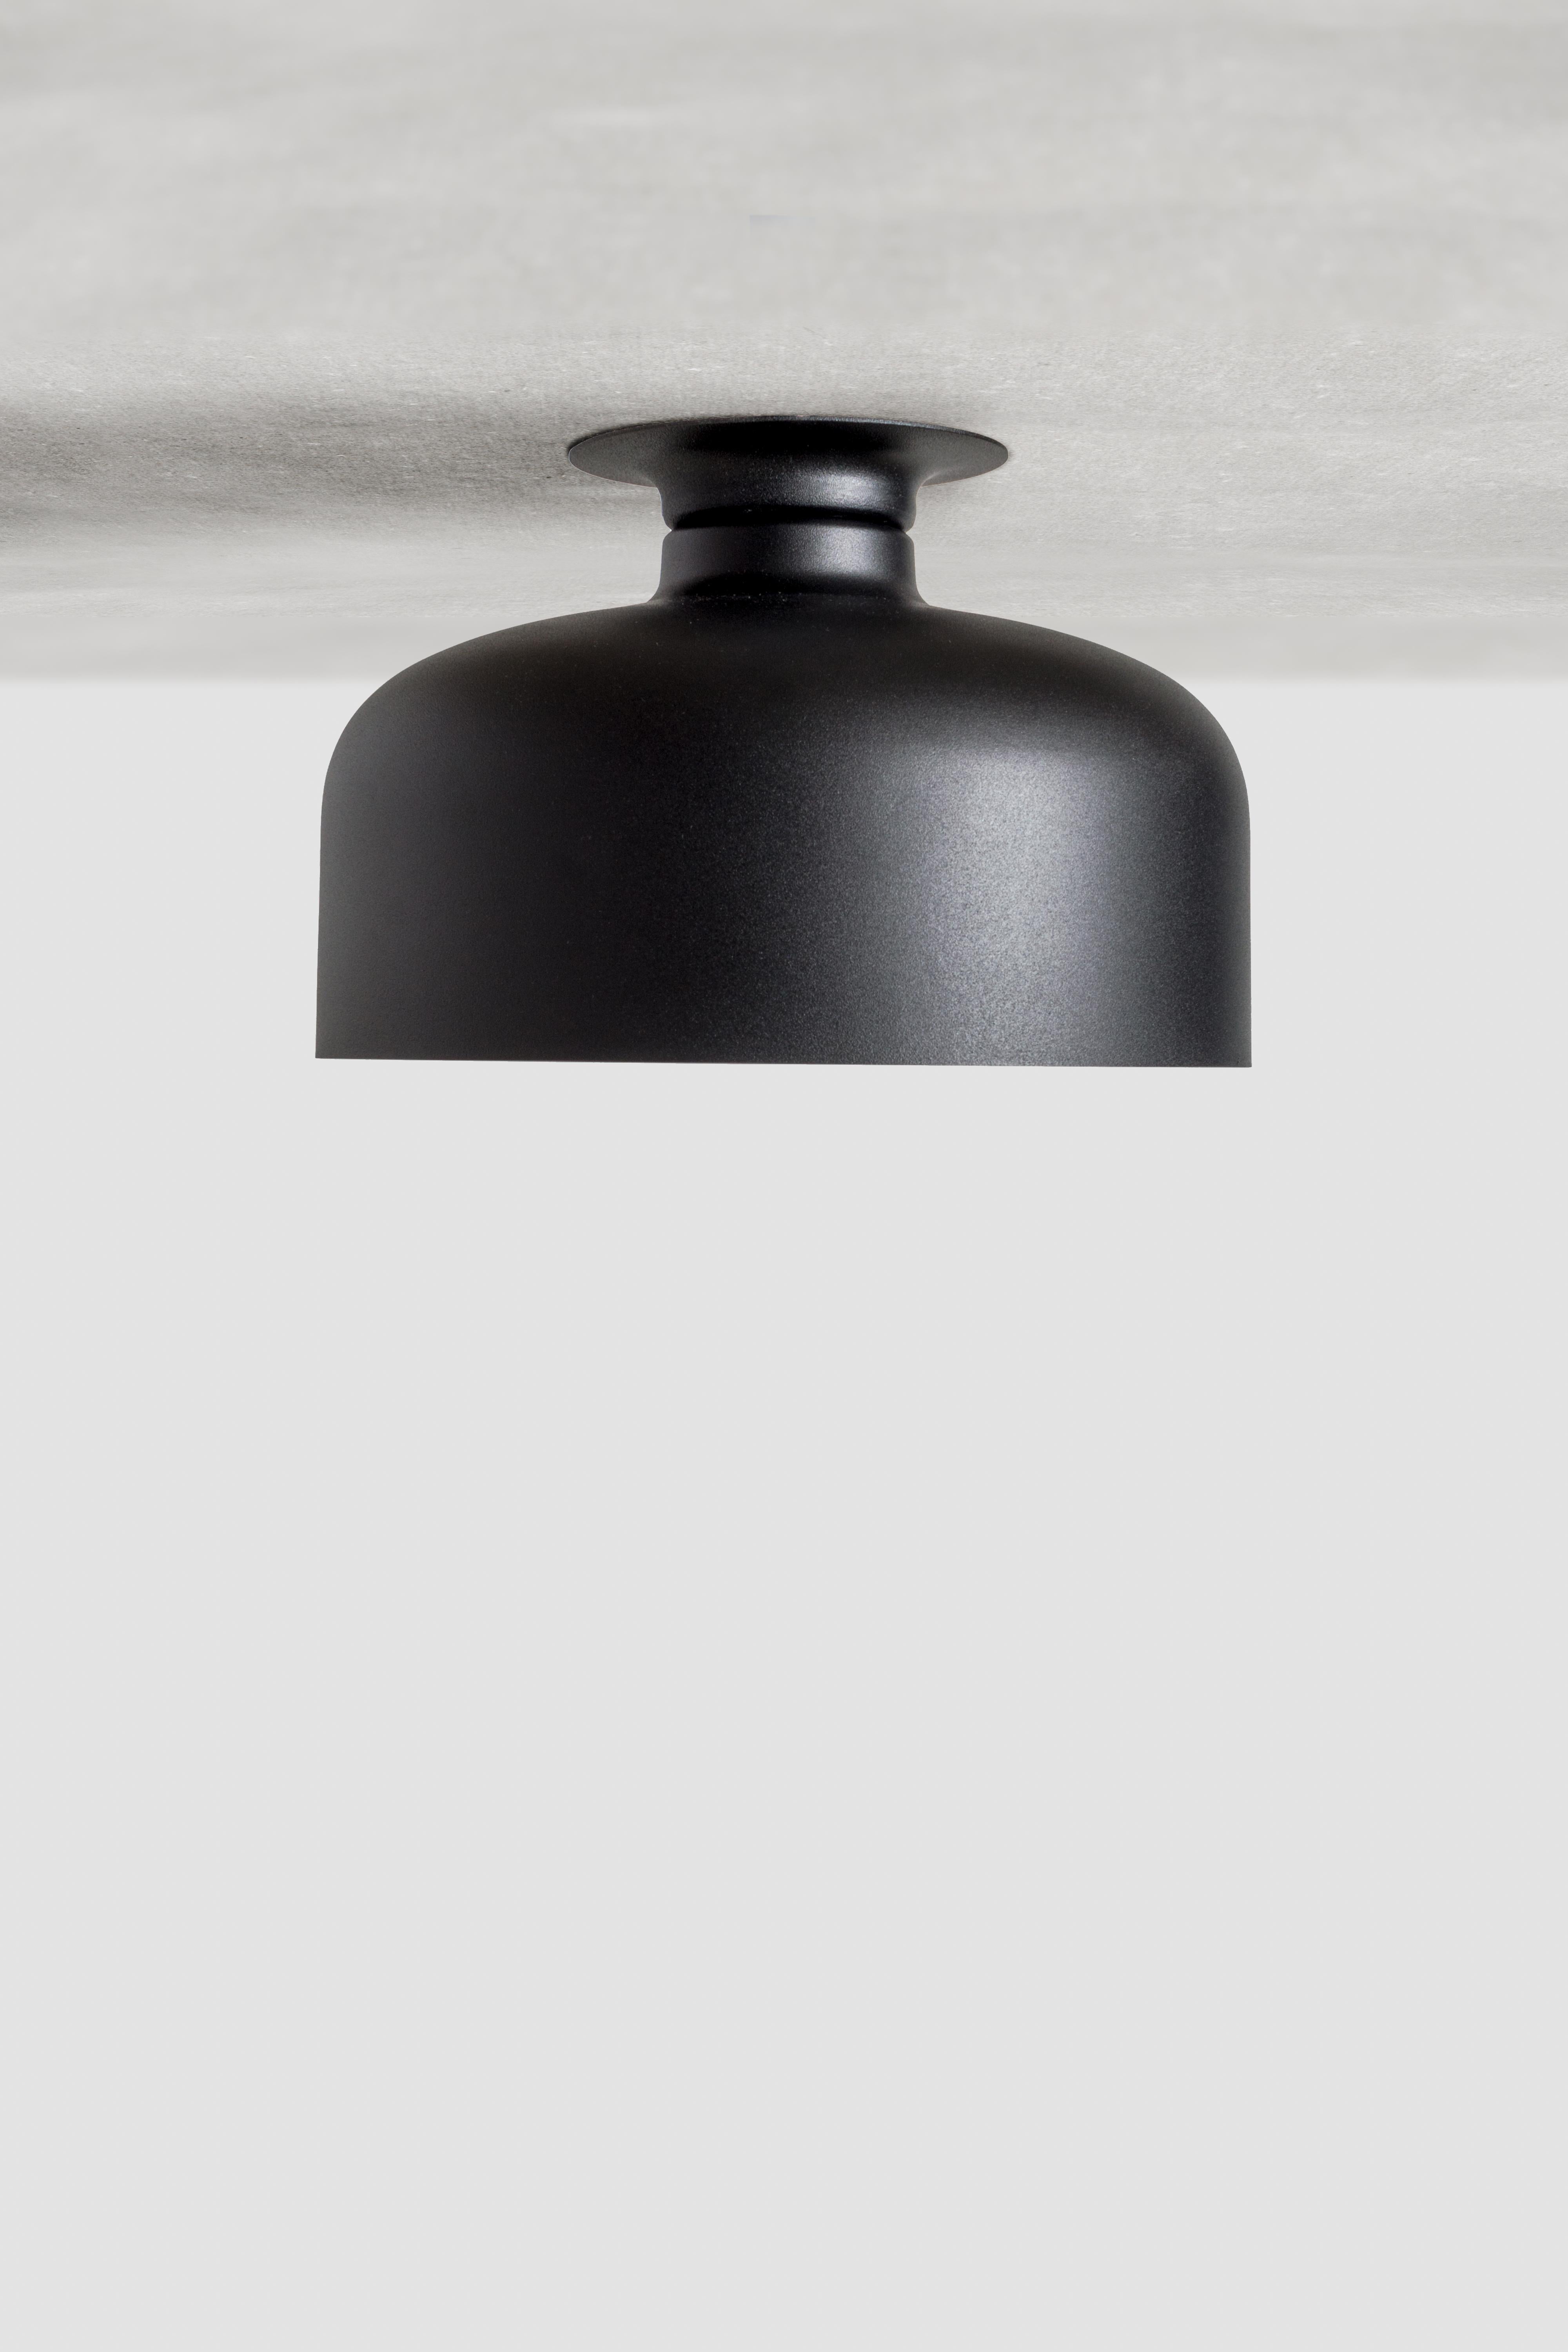 Spotlight Volumes, ceiling lamp / wall lamp
Design: Lukas Peet, Editor: AND Light
UL Listed

Model shown: A

Inspired by spotlights, the Spotlight Volumes series is based on four unique shade profiles which combine in various ways. While designed